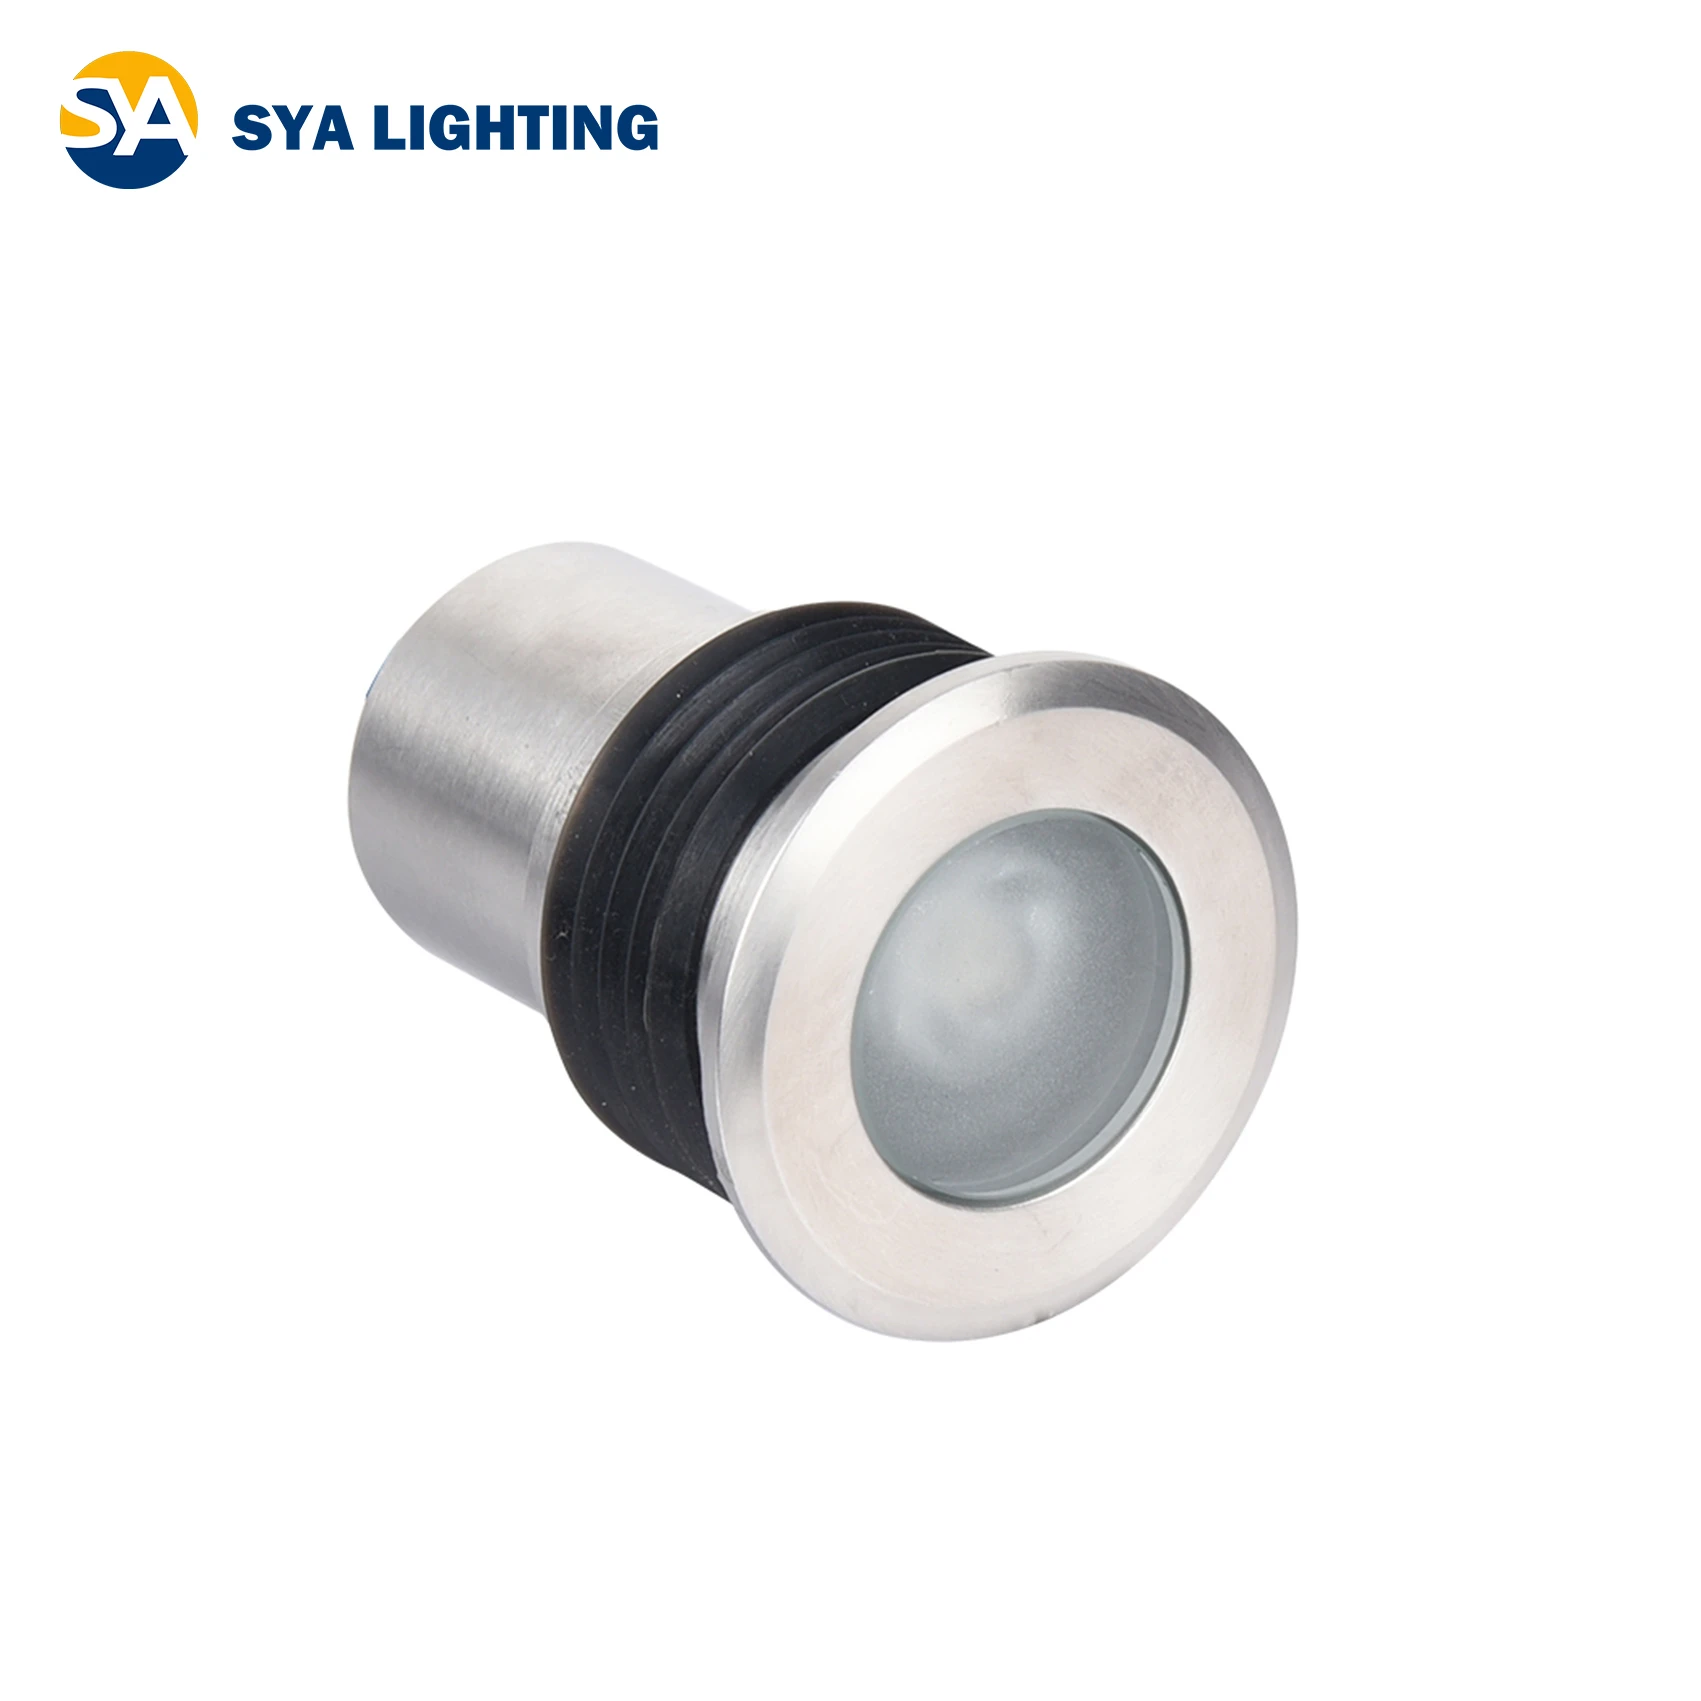 SYA-104 China Factory Outside Inground Deck Lighting Recessed Waterproof Outdoor Led Deck Light